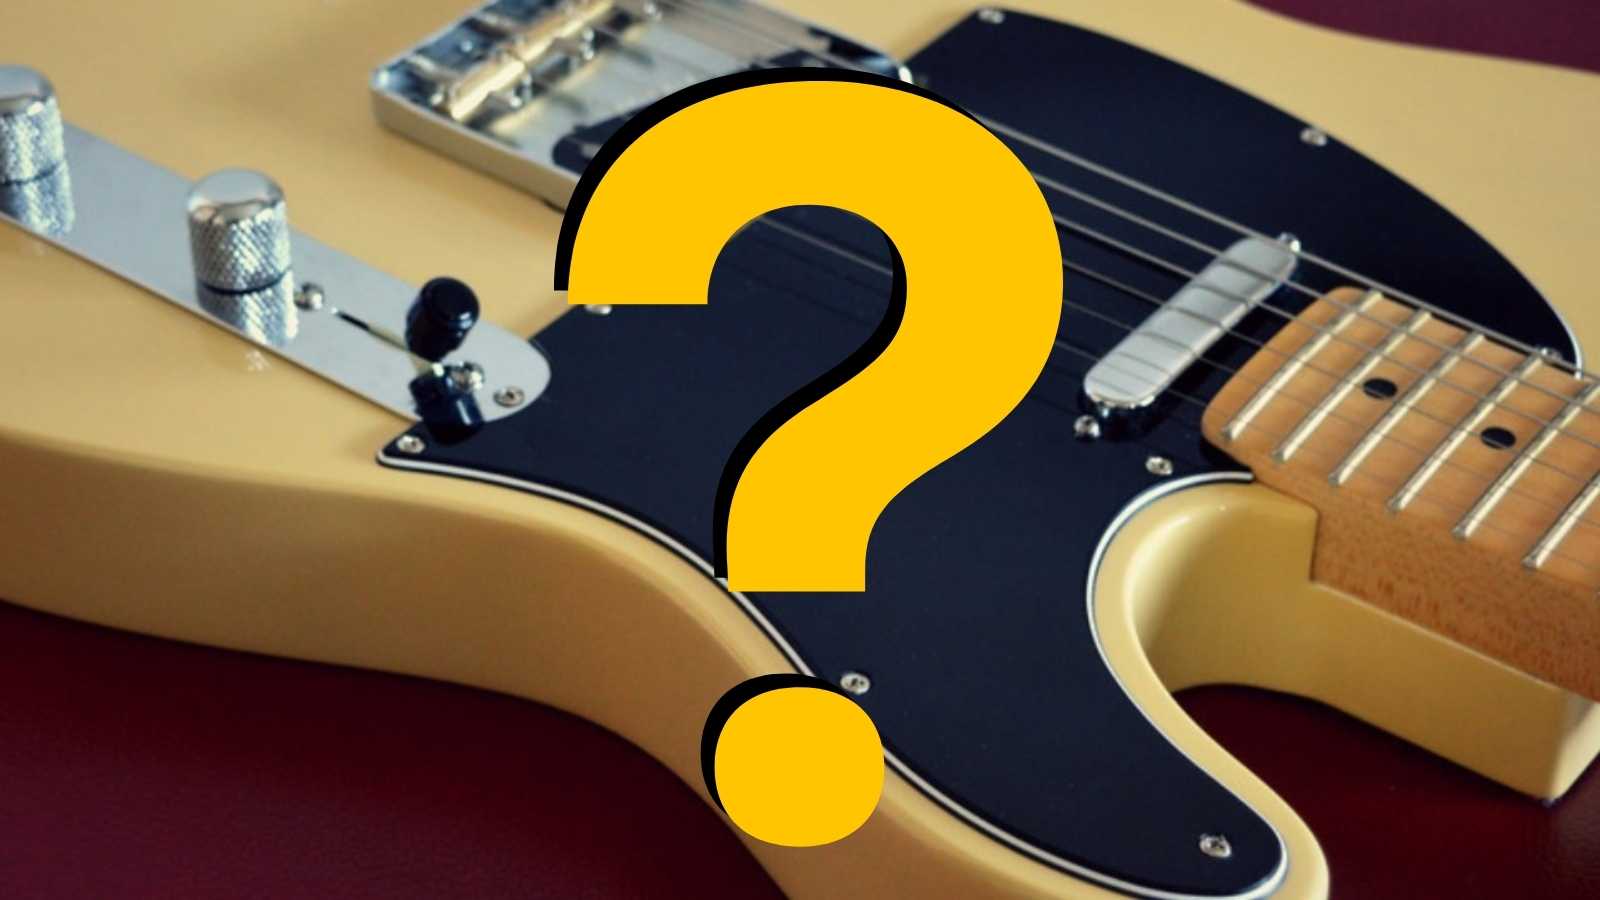 What's The Best Telecaster For Under $500? Let's Find Out